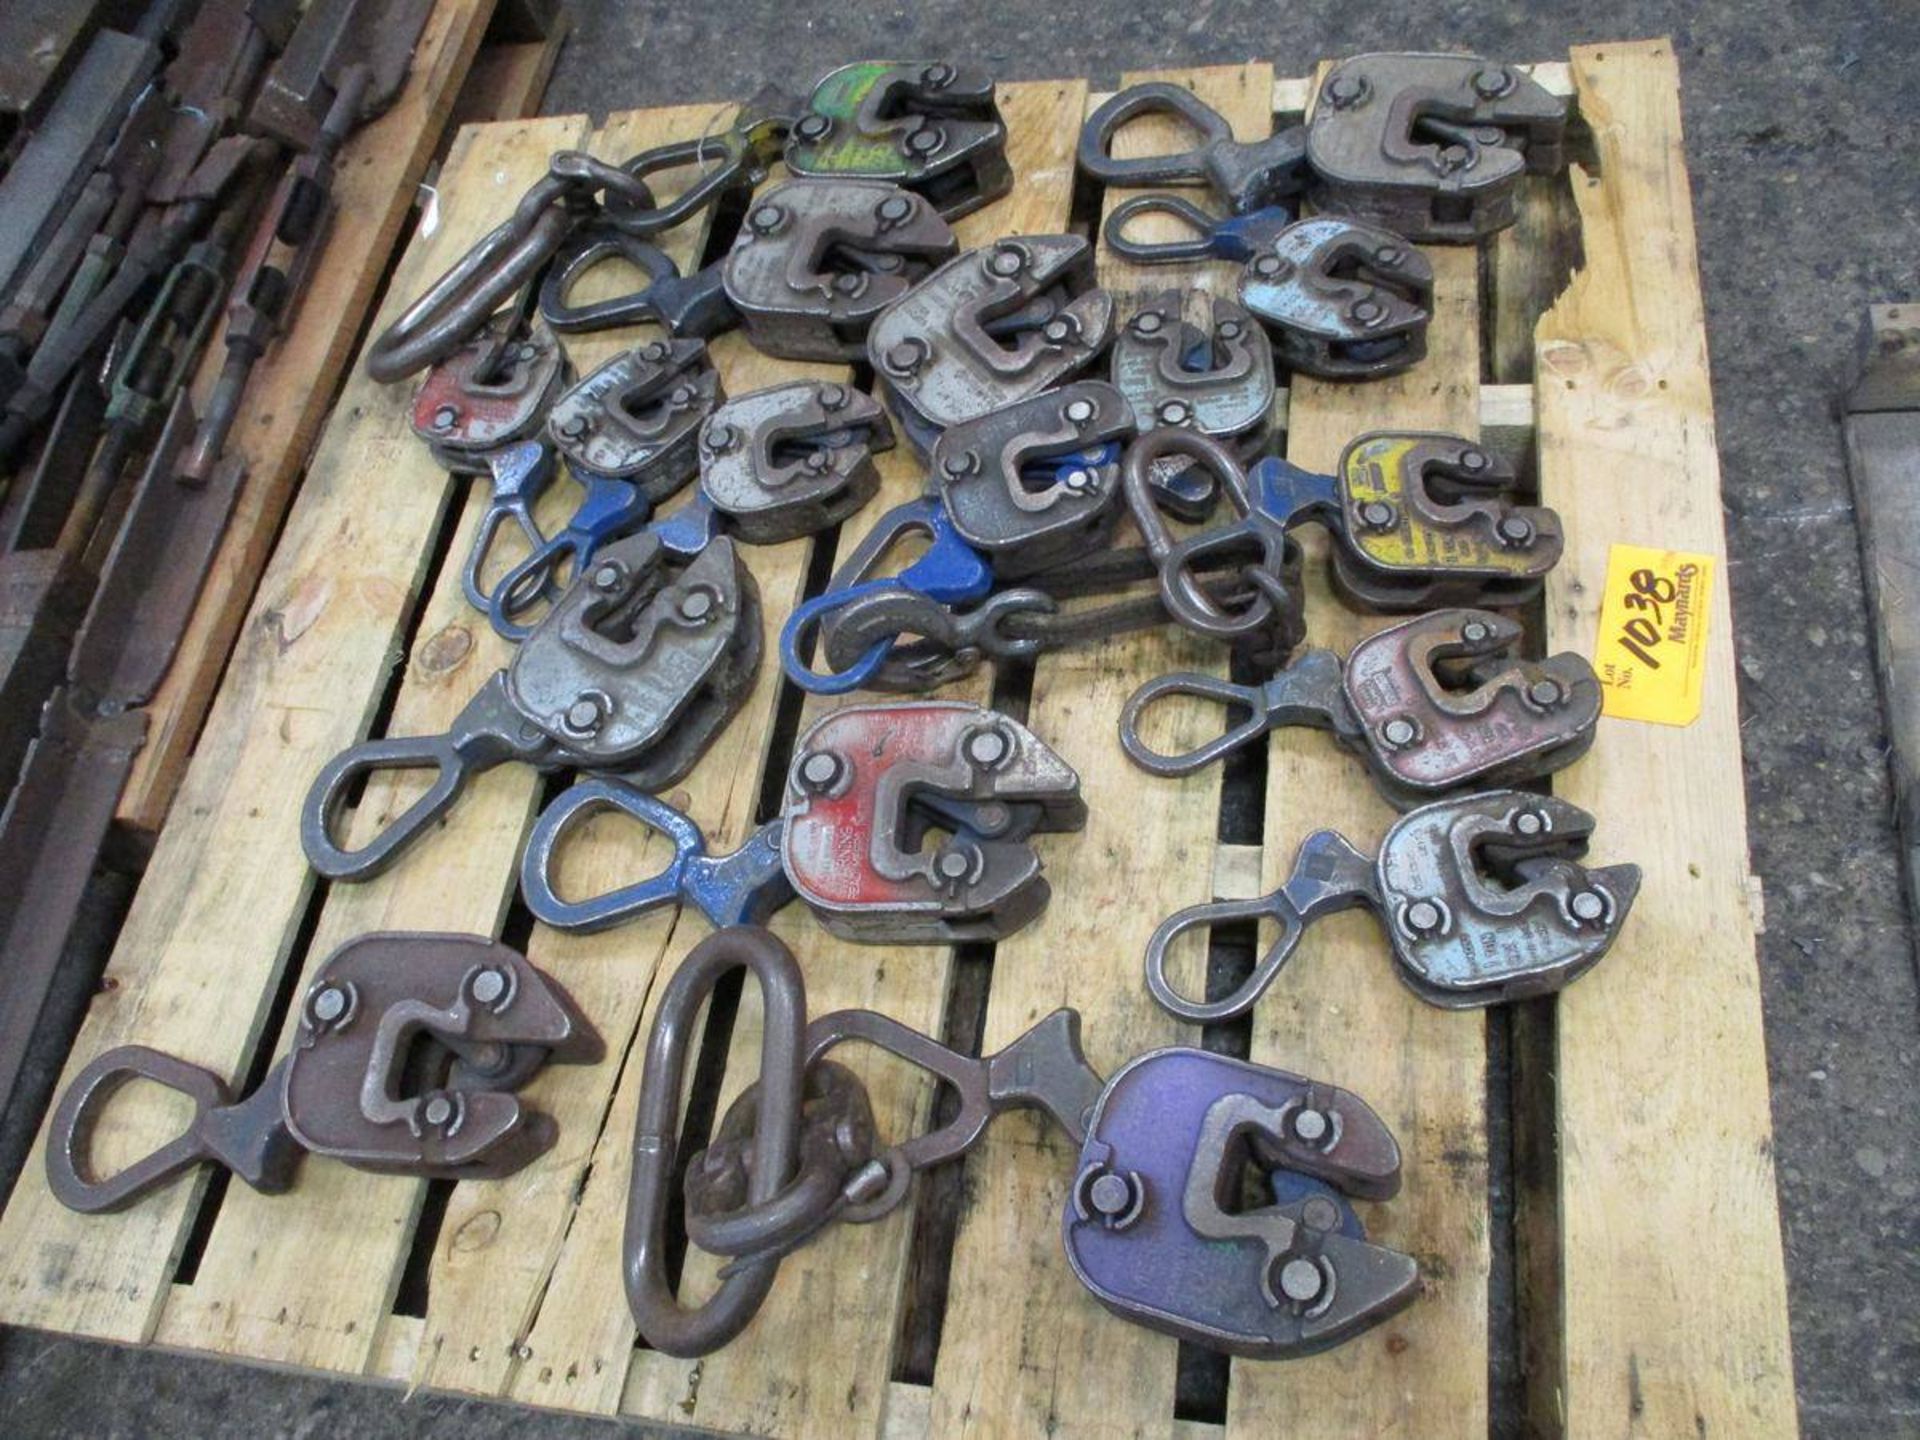 Lot of Assorted Plate Lifting Clamps - Image 3 of 3